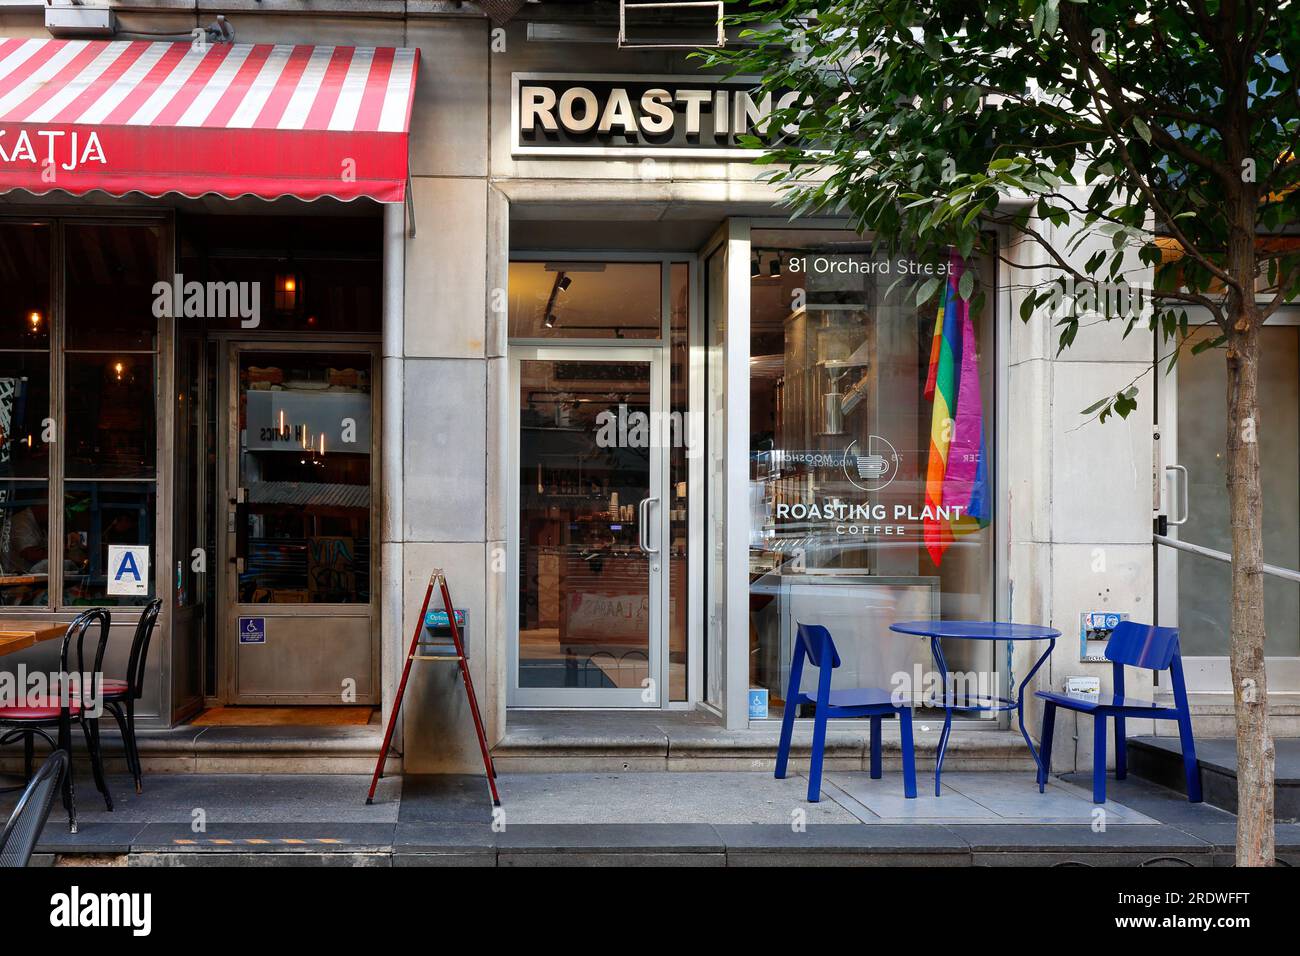 Roasting Plant, 61 Orchard St, New York, NYC storefront photo of a coffee shop and Javabot powered roasting system in Manhattan's Lower East Side. Stock Photo